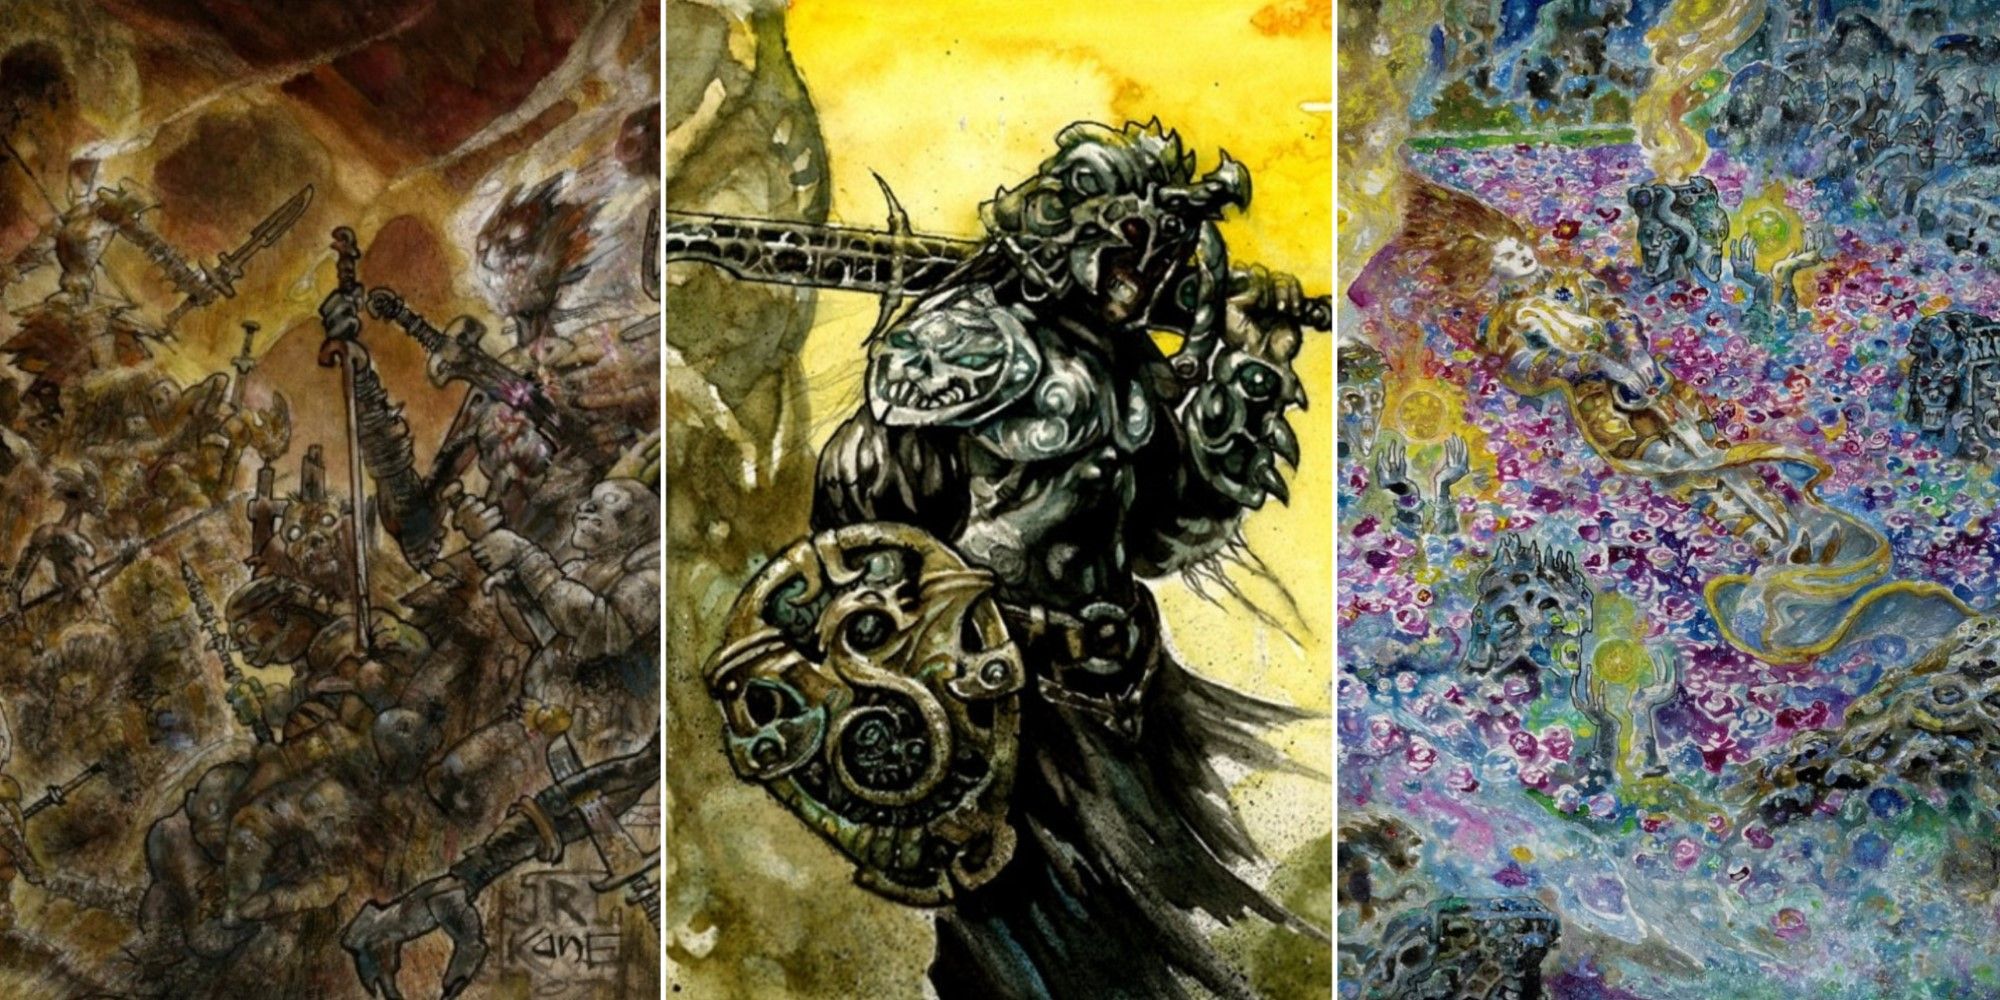 Artwork from three different Magic: The Gathering cards by Richard Kane Ferguson.